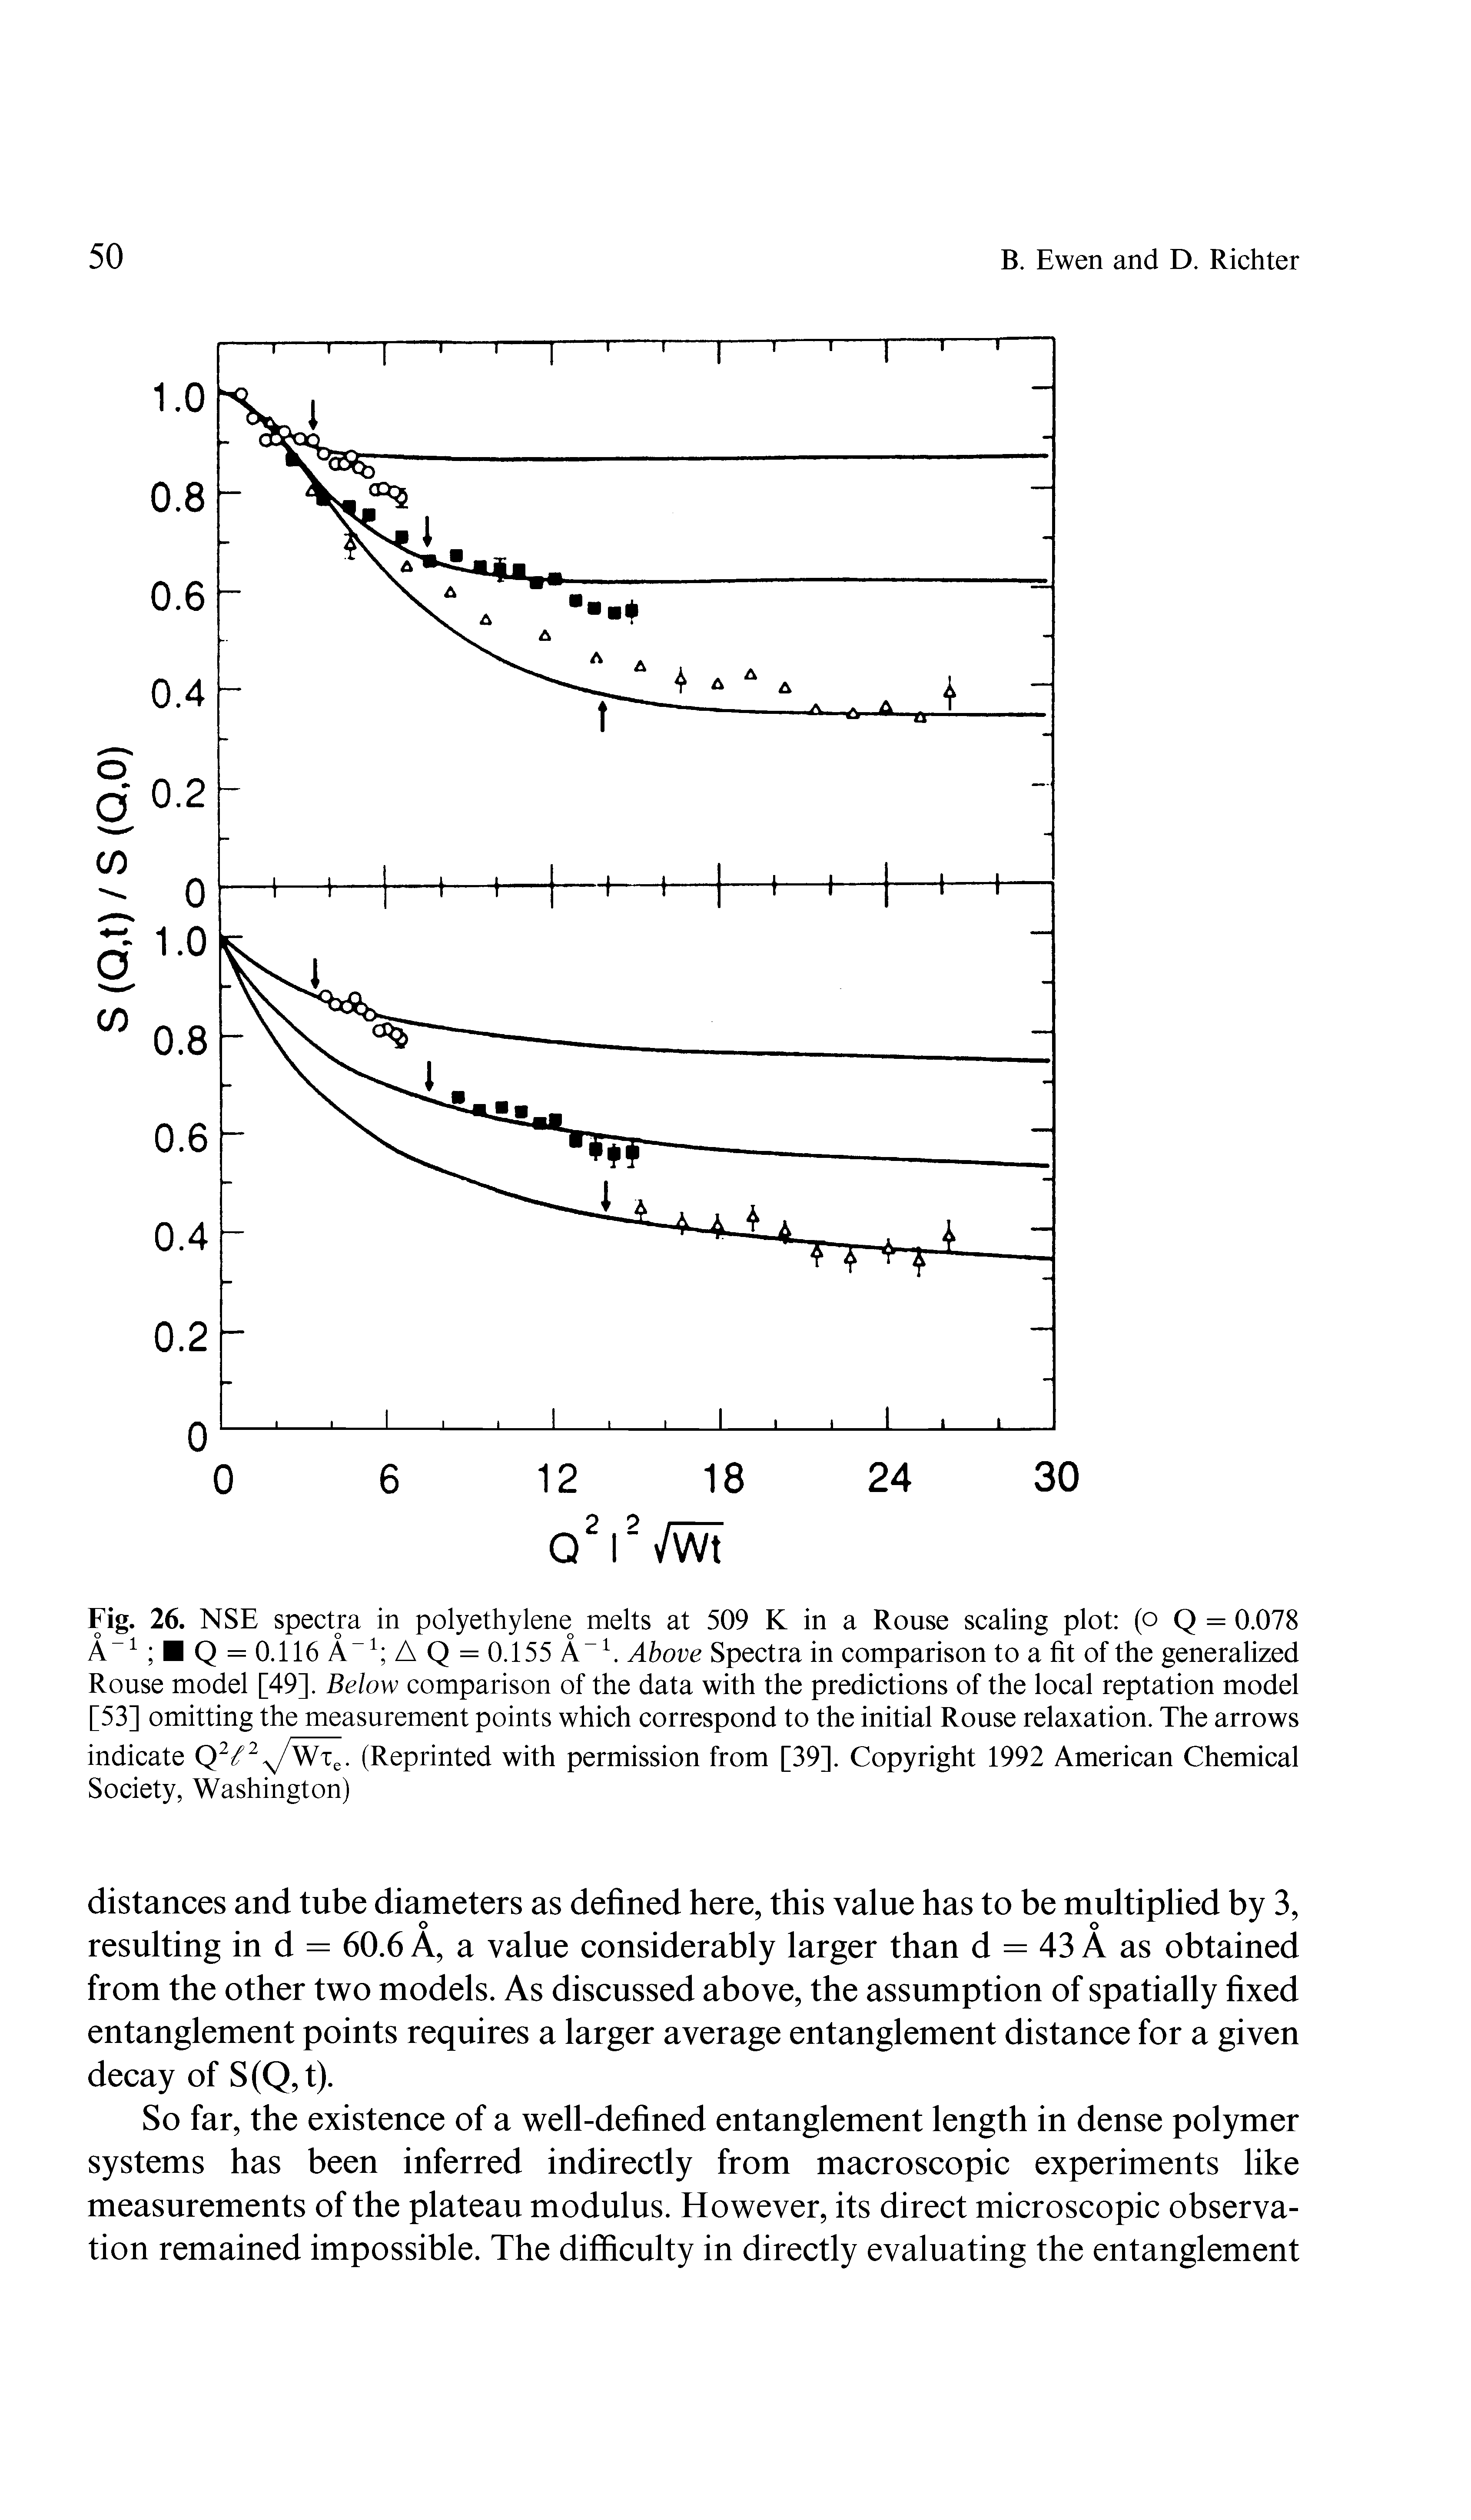 Fig. 26. NSE spectra in polyethyleneo melts at 509 K in a Rouse scaling plot (o Q = 0.078 A-1 Q = 0.116 A-1 A Q = 0.155 A-1. Above Spectra in comparison to a fit of the generalized Rouse model [49]. Below comparison of the data with the predictions of the local reptation model [53] omitting the measurement points which correspond to the initial Rouse relaxation. The arrows indicate Q2/2V/Wxe. (Reprinted with permission from [39]. Copyright 1992 American Chemical Society, Washington)...